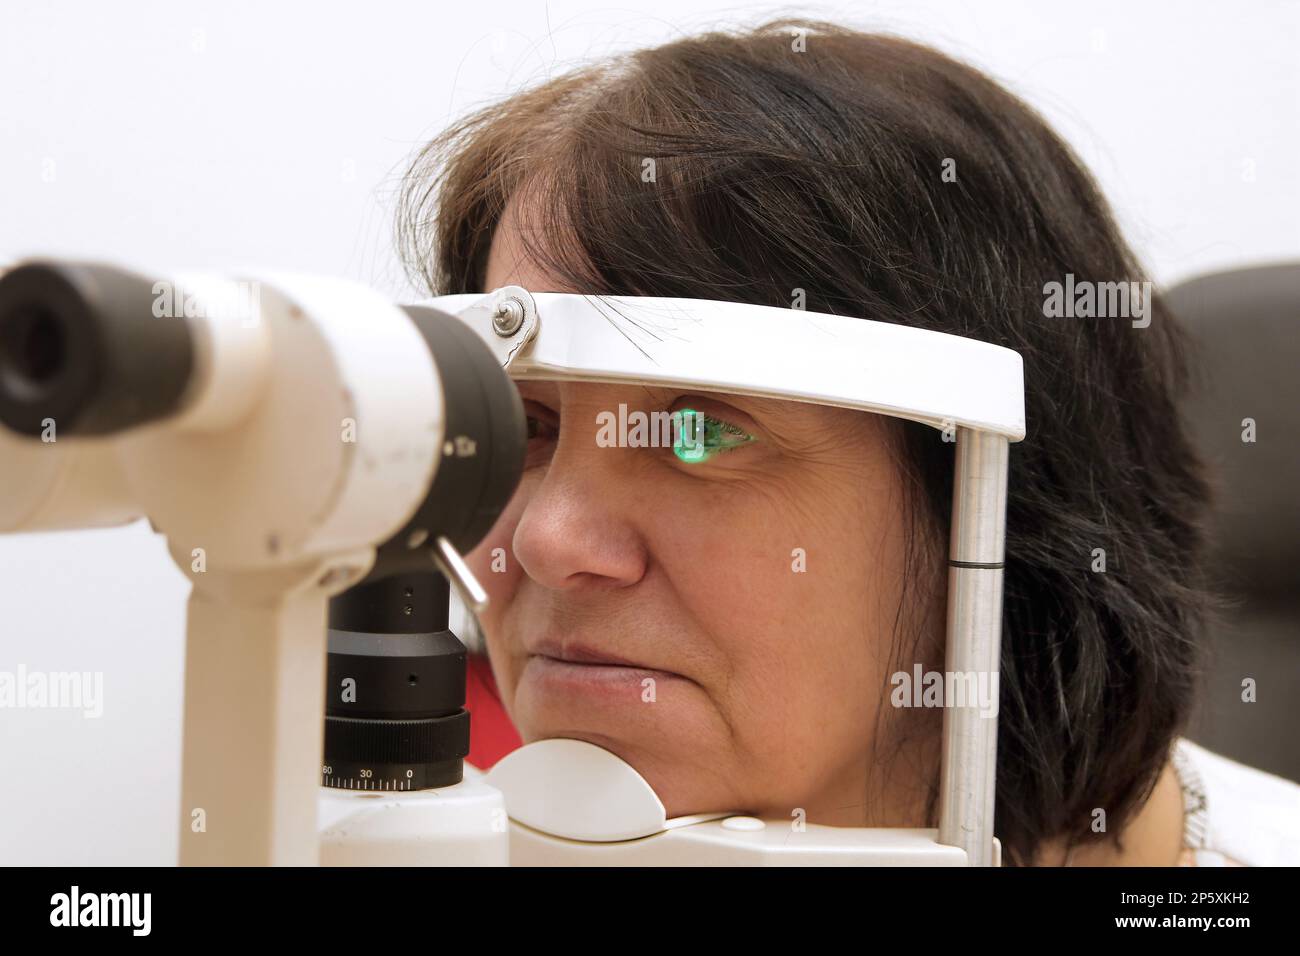 woman at the optician with slit-lamp microscope Stock Photo